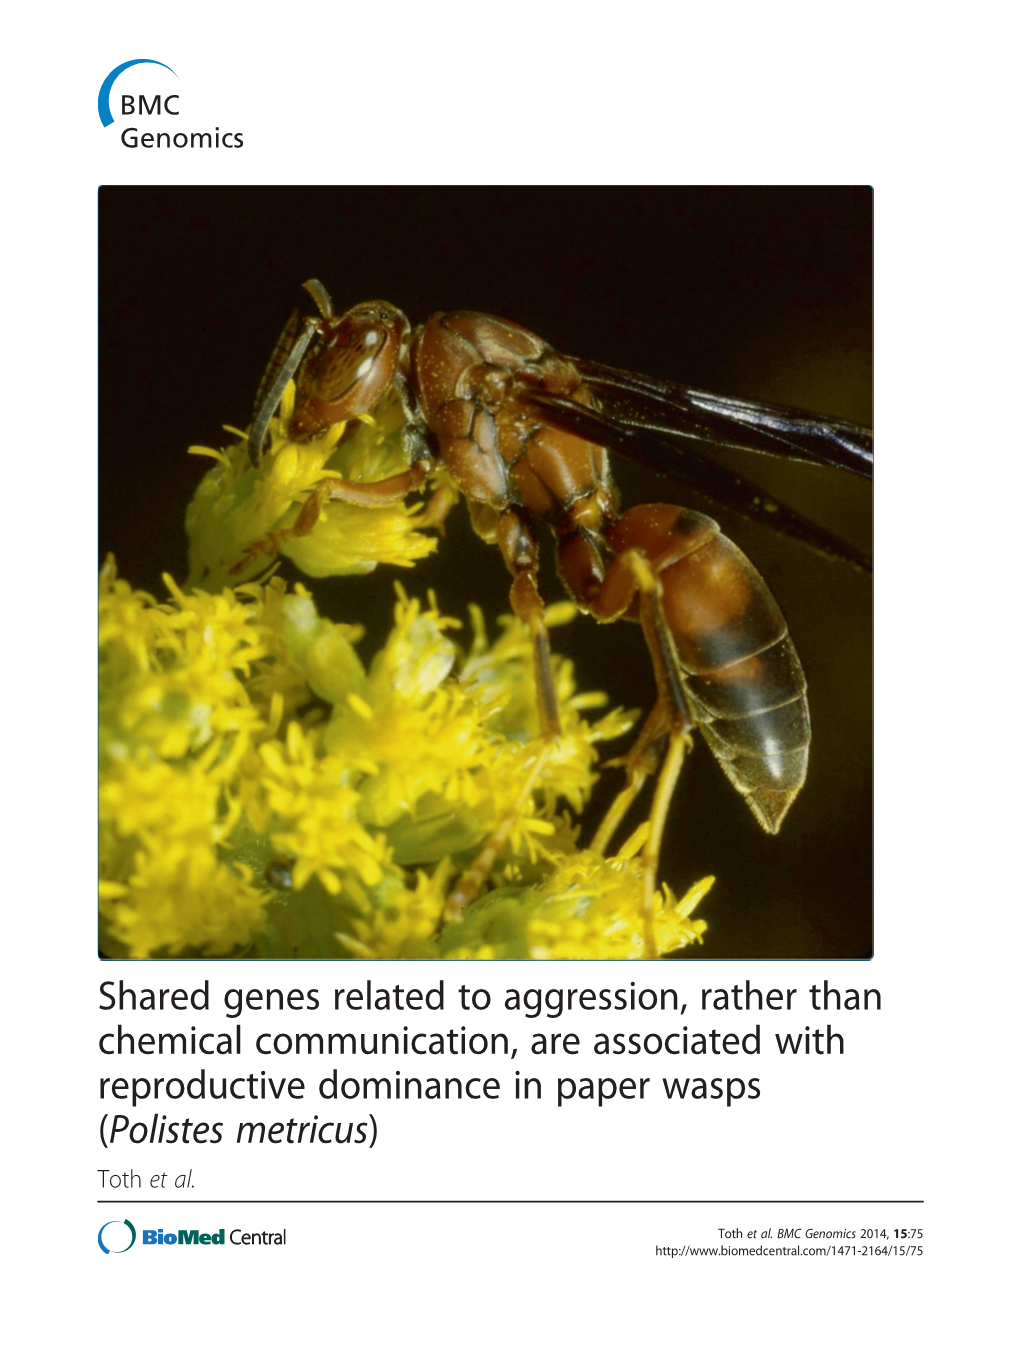 Shared Genes Related to Aggression, Rather Than Chemical Communication, Are Associated with Reproductive Dominance in Paper Wasps (Polistes Metricus) Toth Et Al